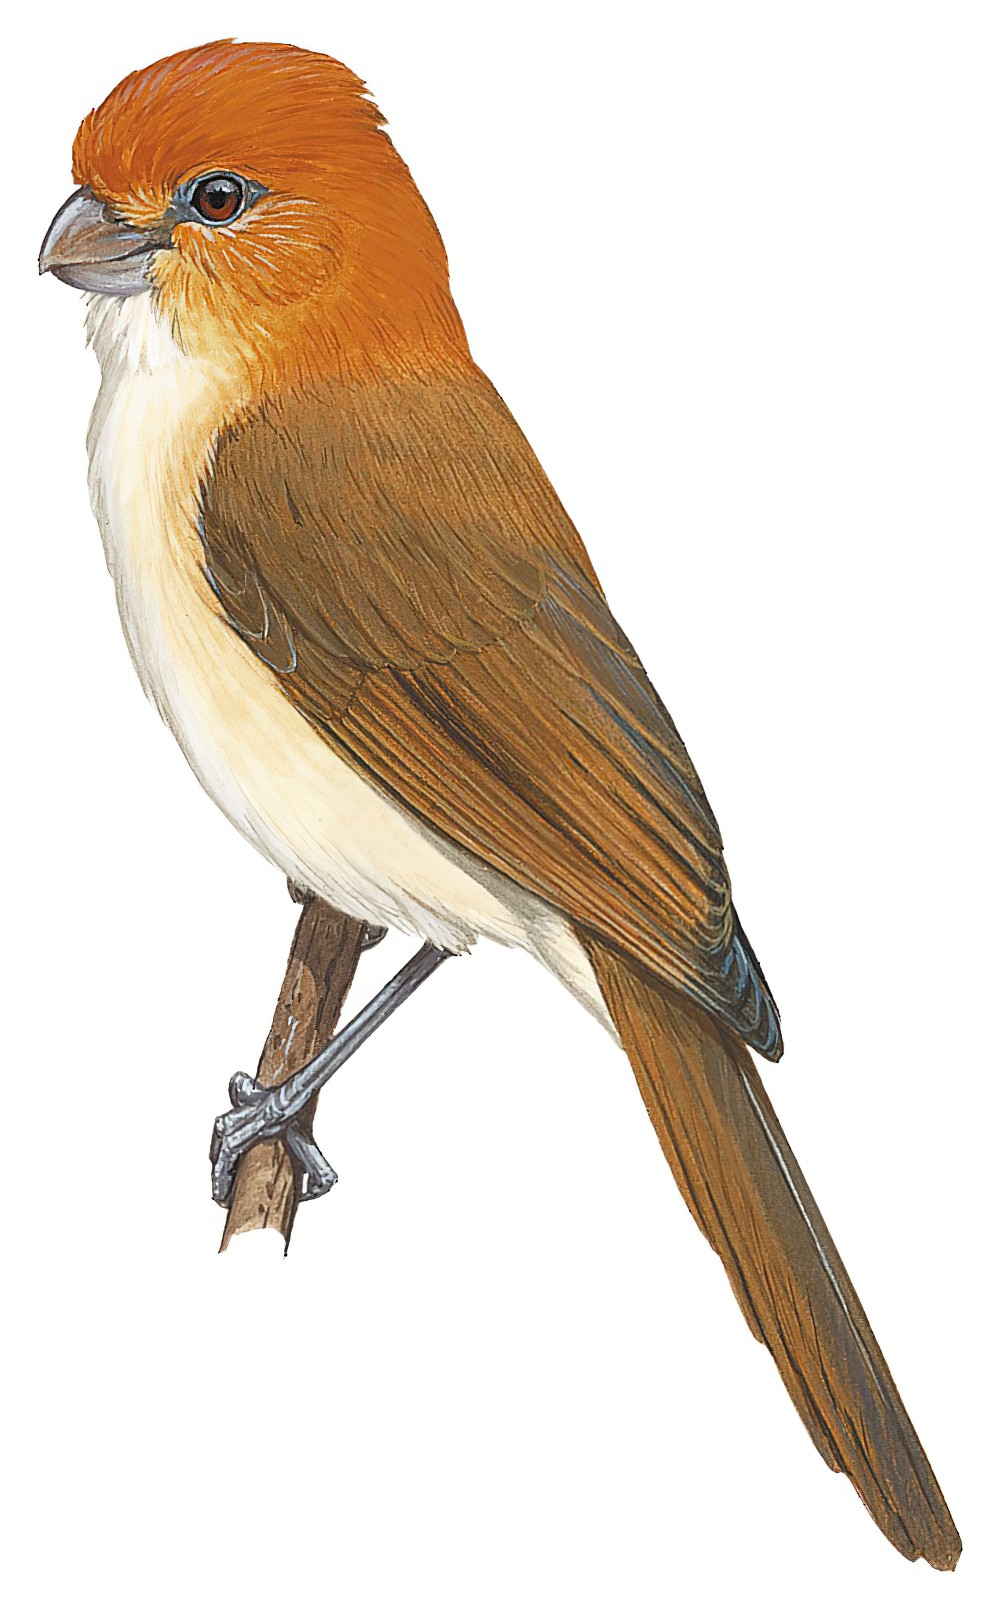 White-breasted Parrotbill / Psittiparus ruficeps